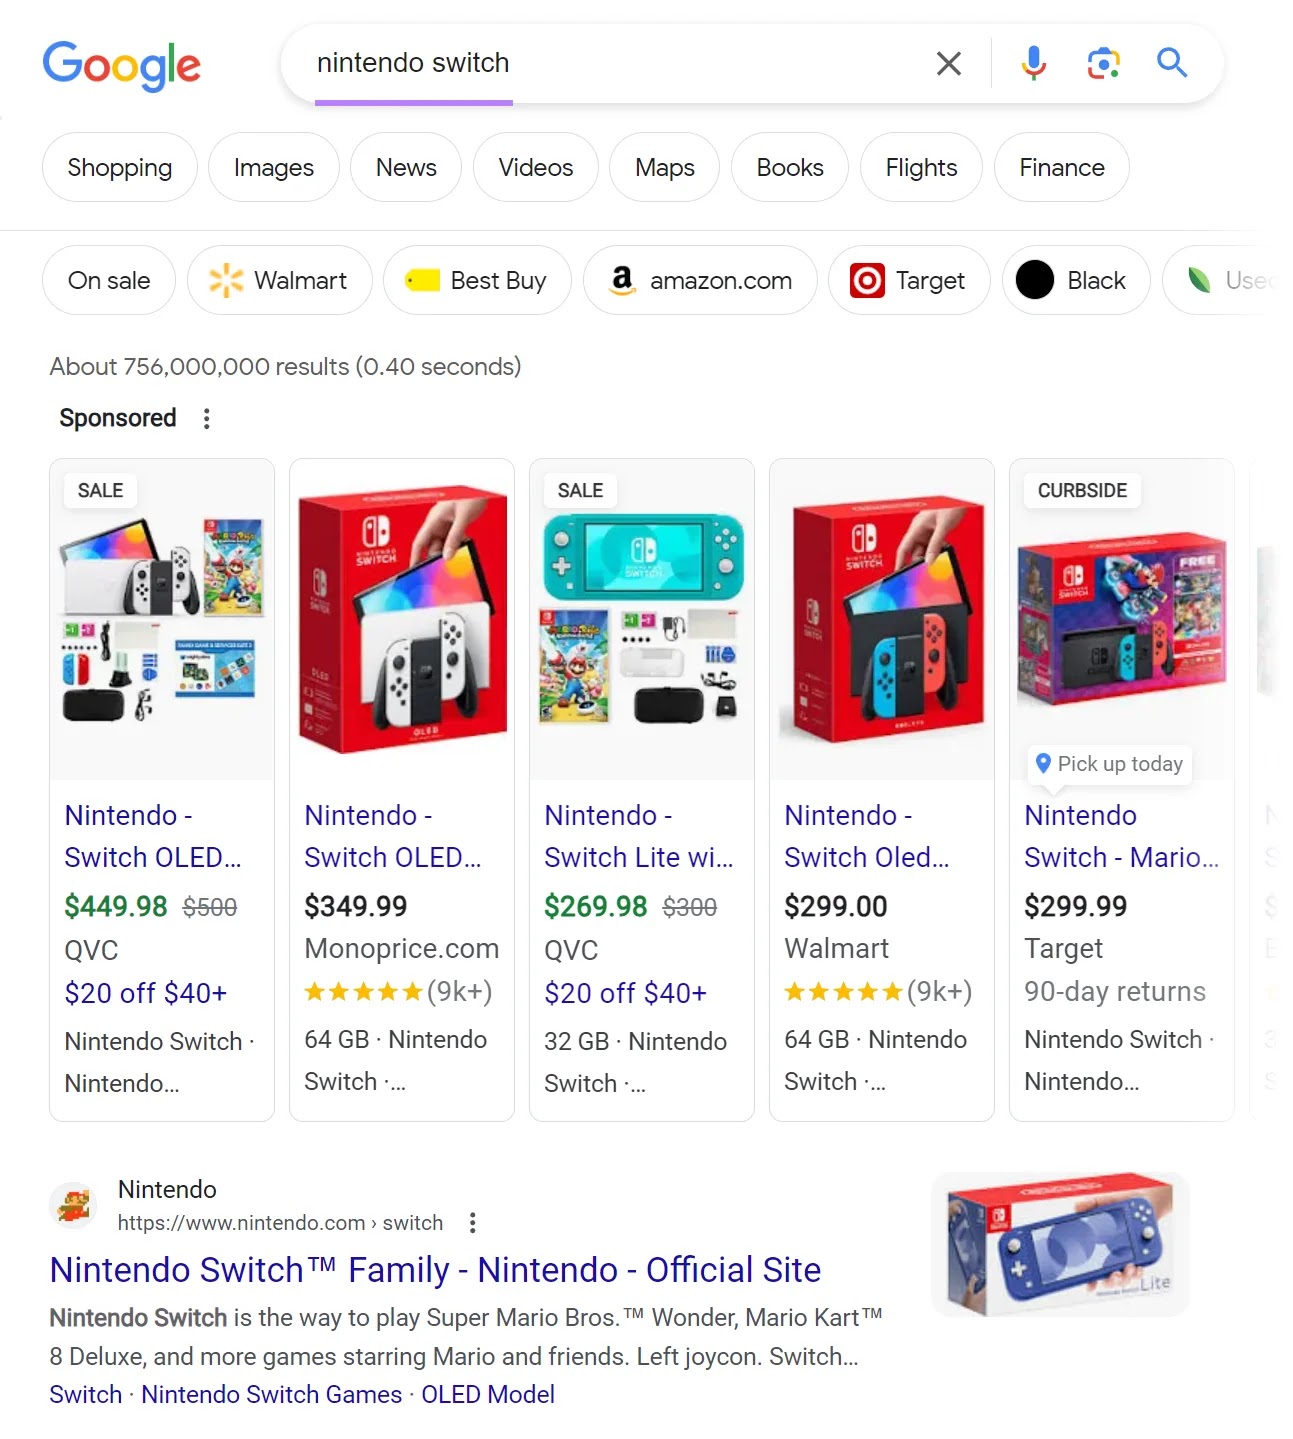 SERP for "nintendo switch" is dominated by product listing ads and product pages results